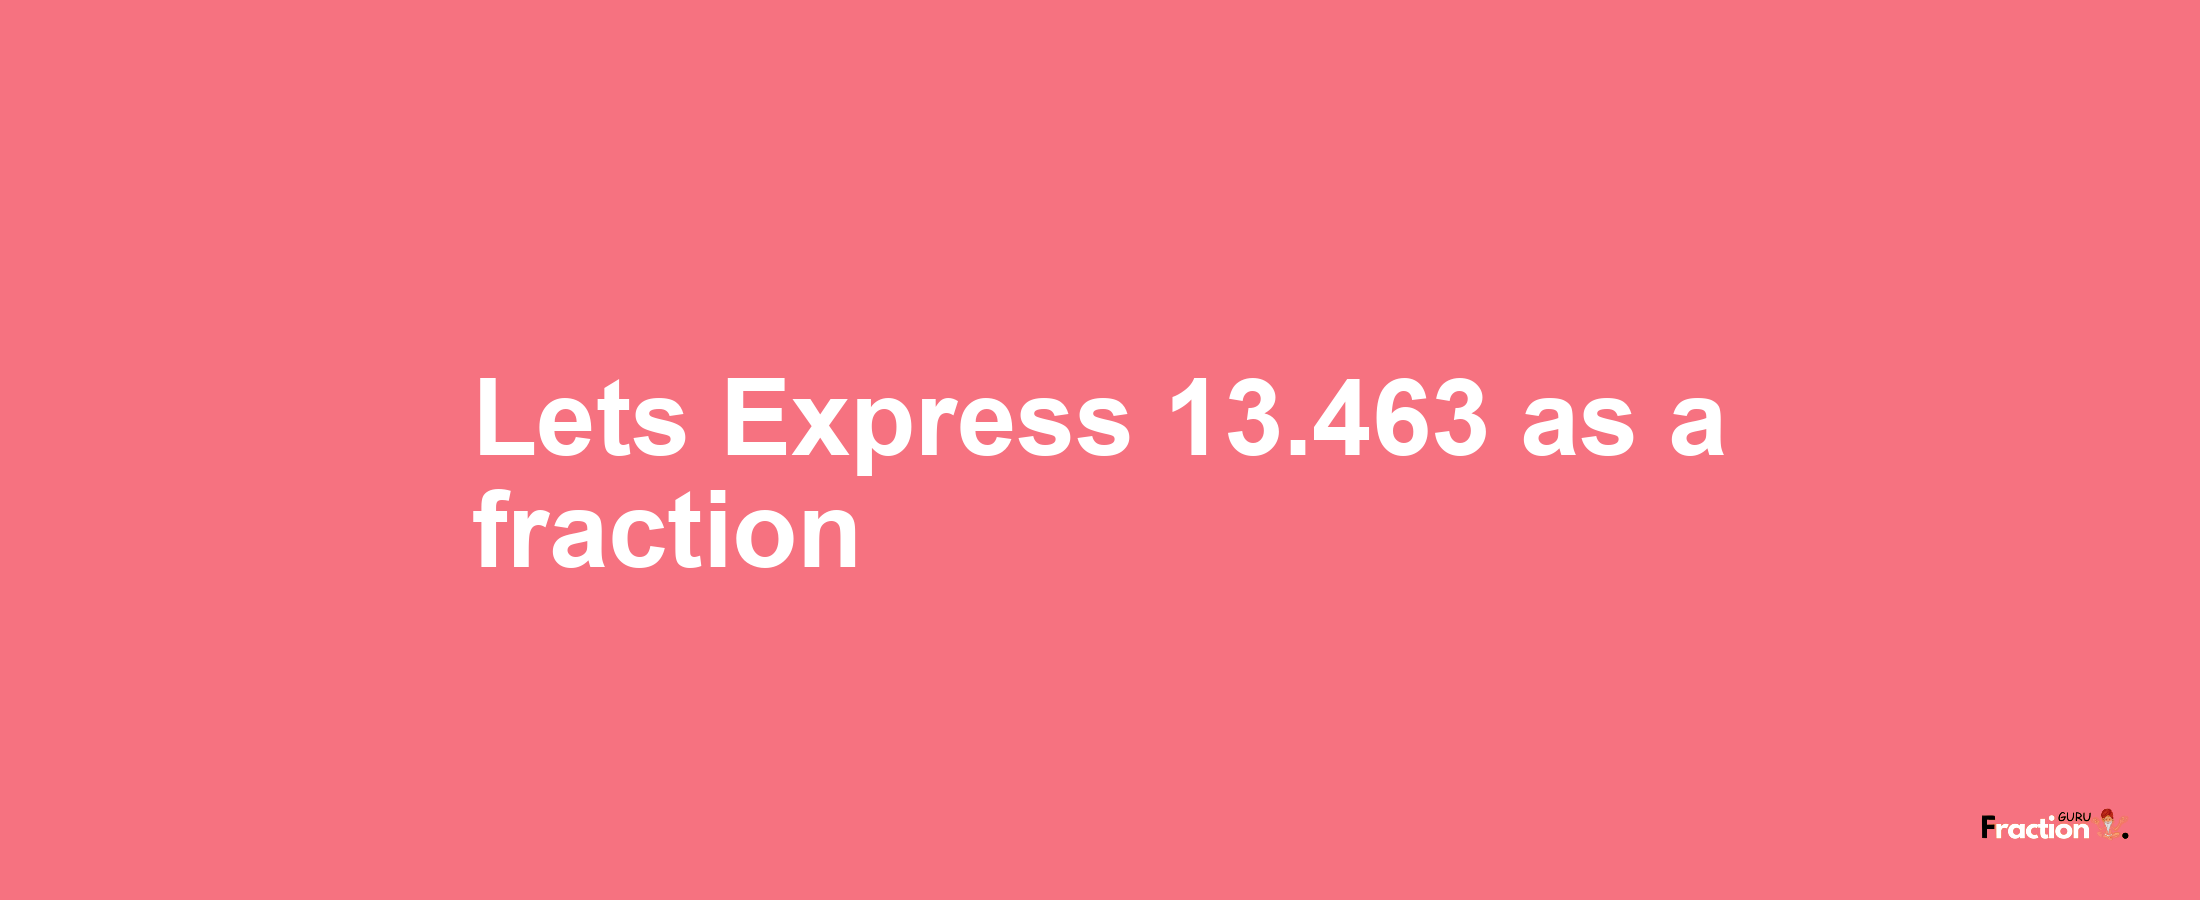 Lets Express 13.463 as afraction